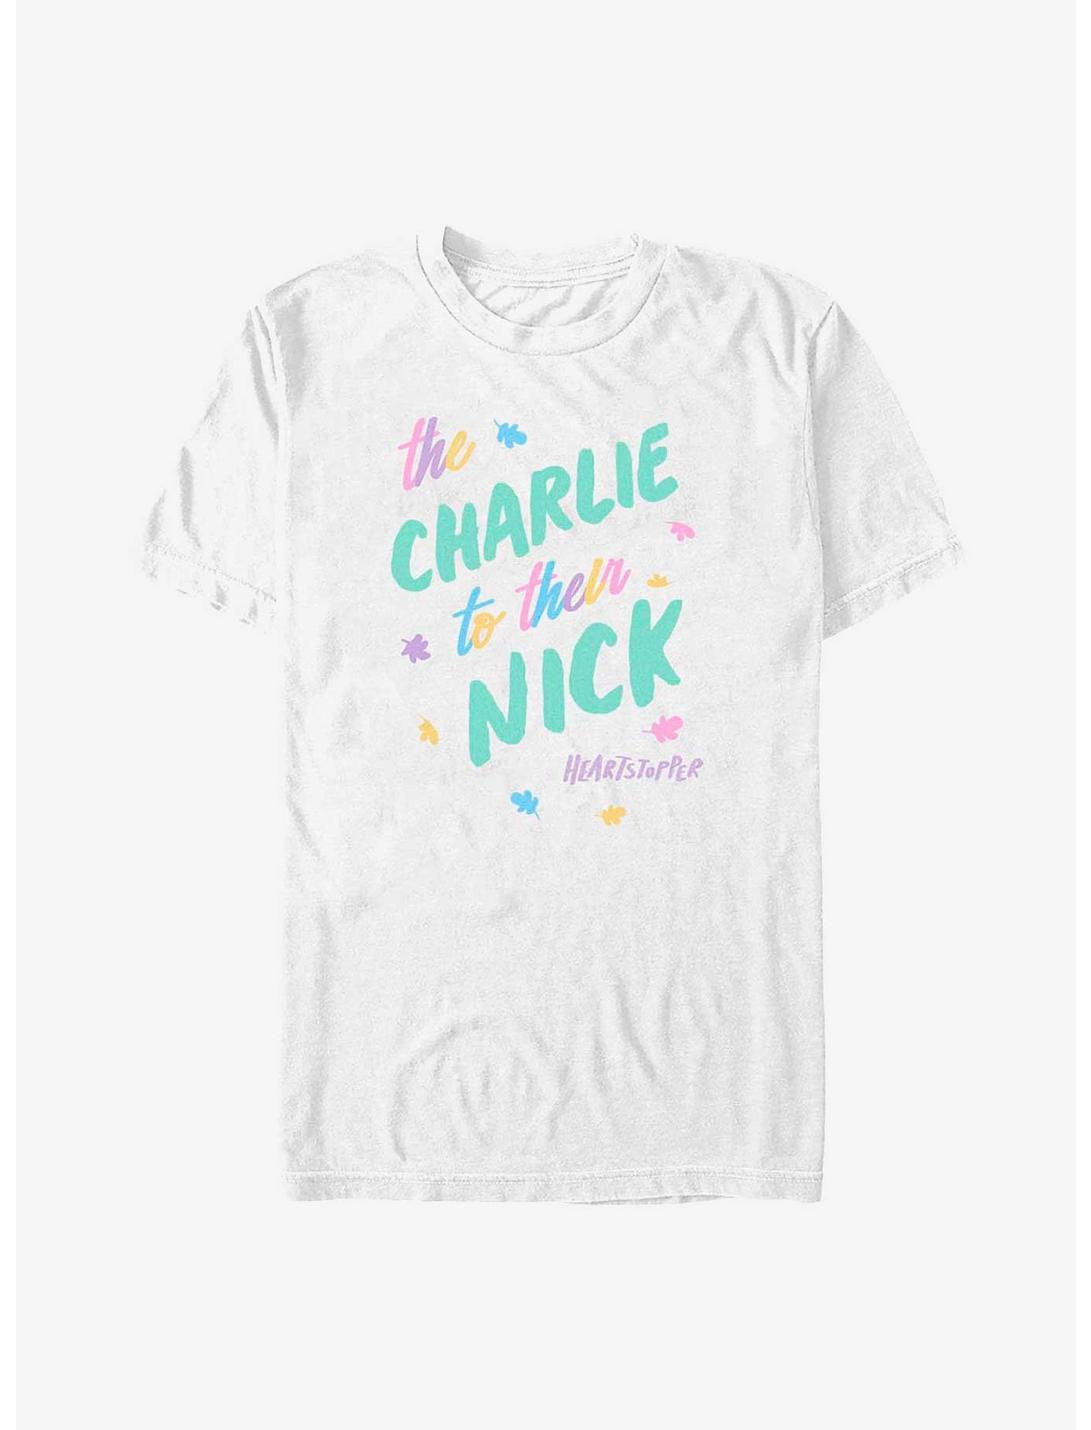 Heartstopper The Charlie To Their Nick Big & Tall T-Shirt, WHITE, hi-res